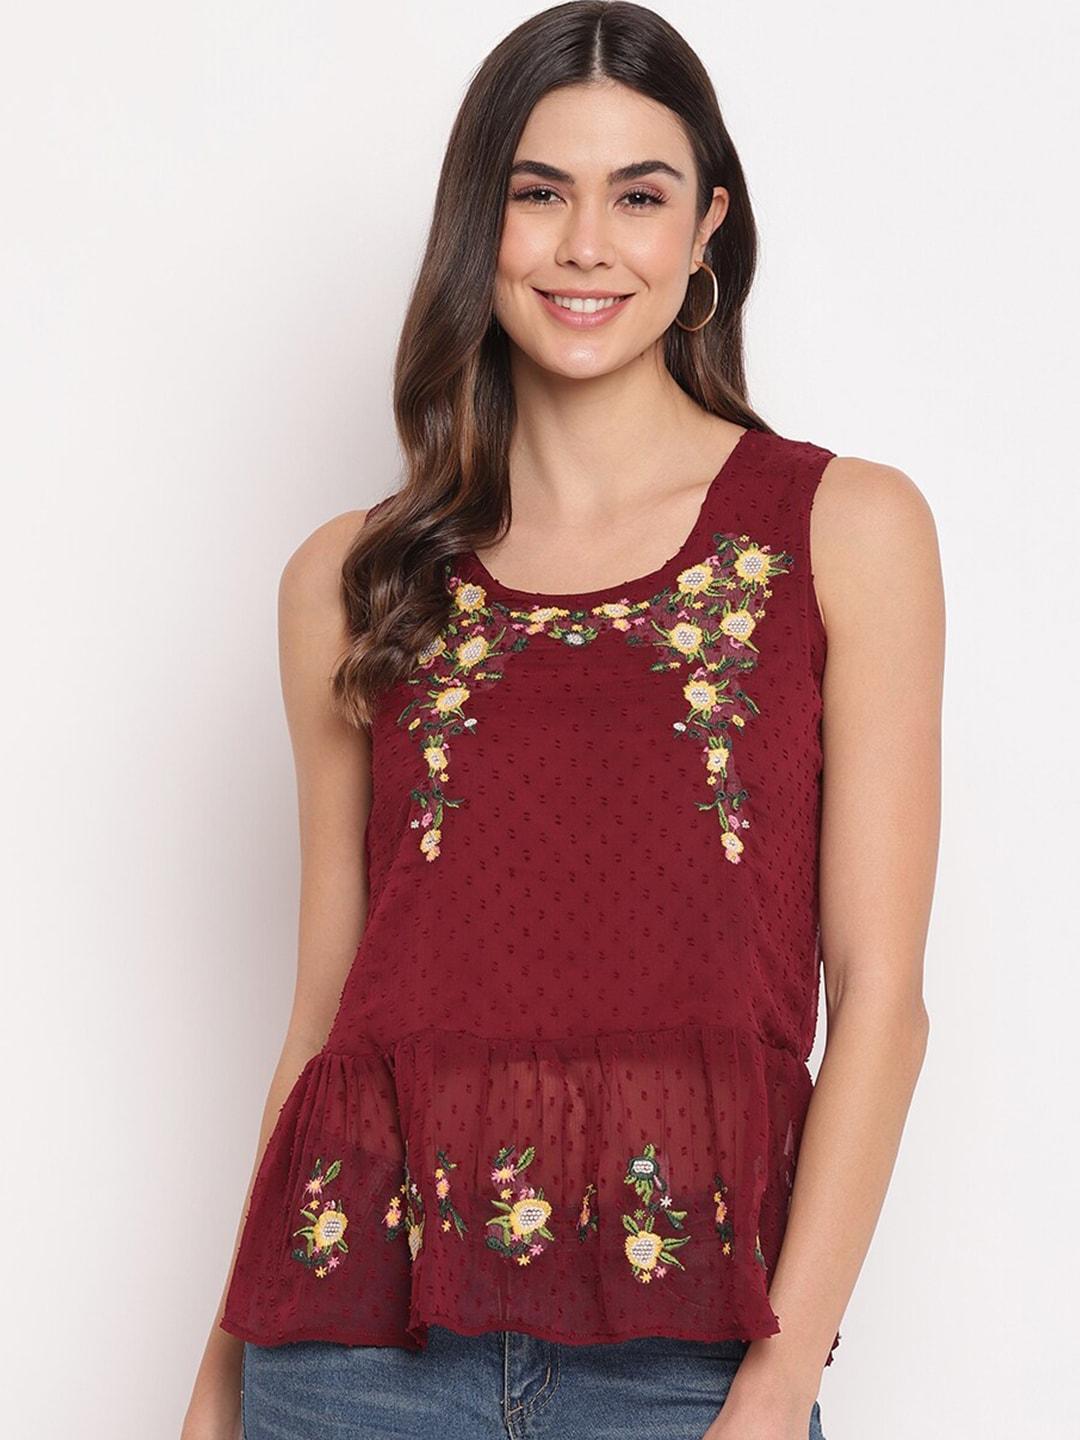 mayra women maroon floral embroidered top